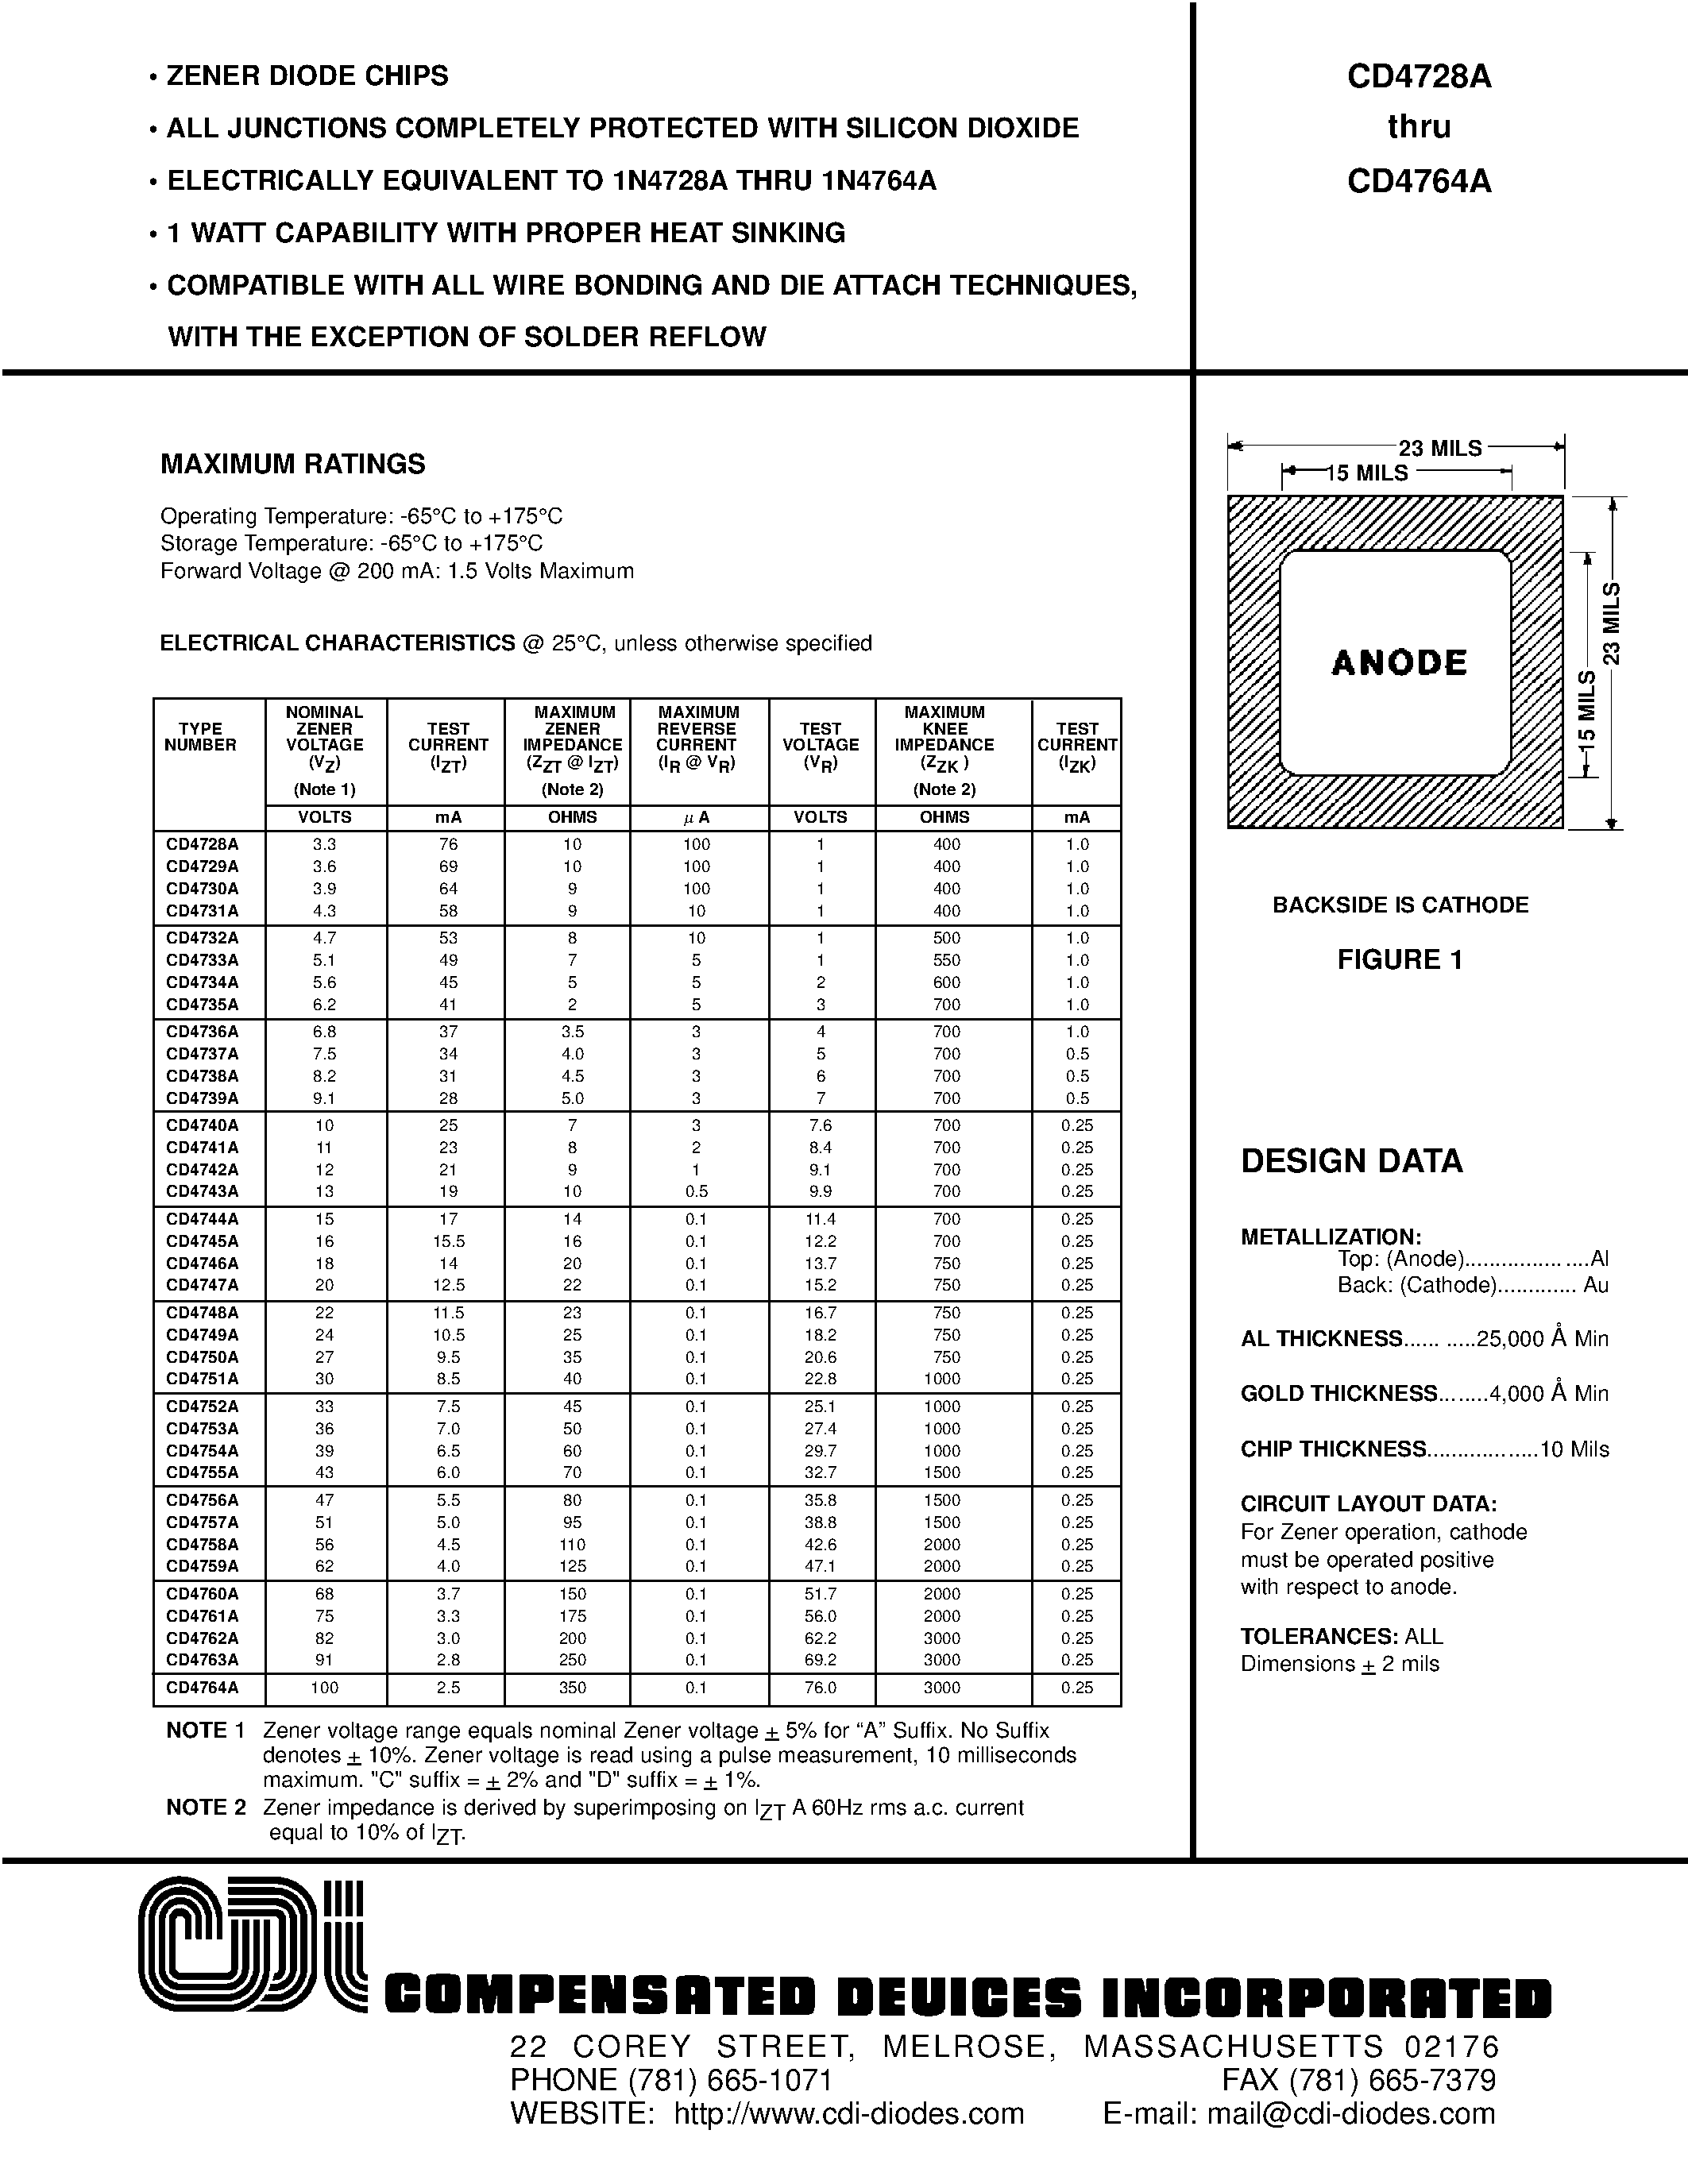 Datasheet CD4754A - ZENER DIODE CHIPS page 1